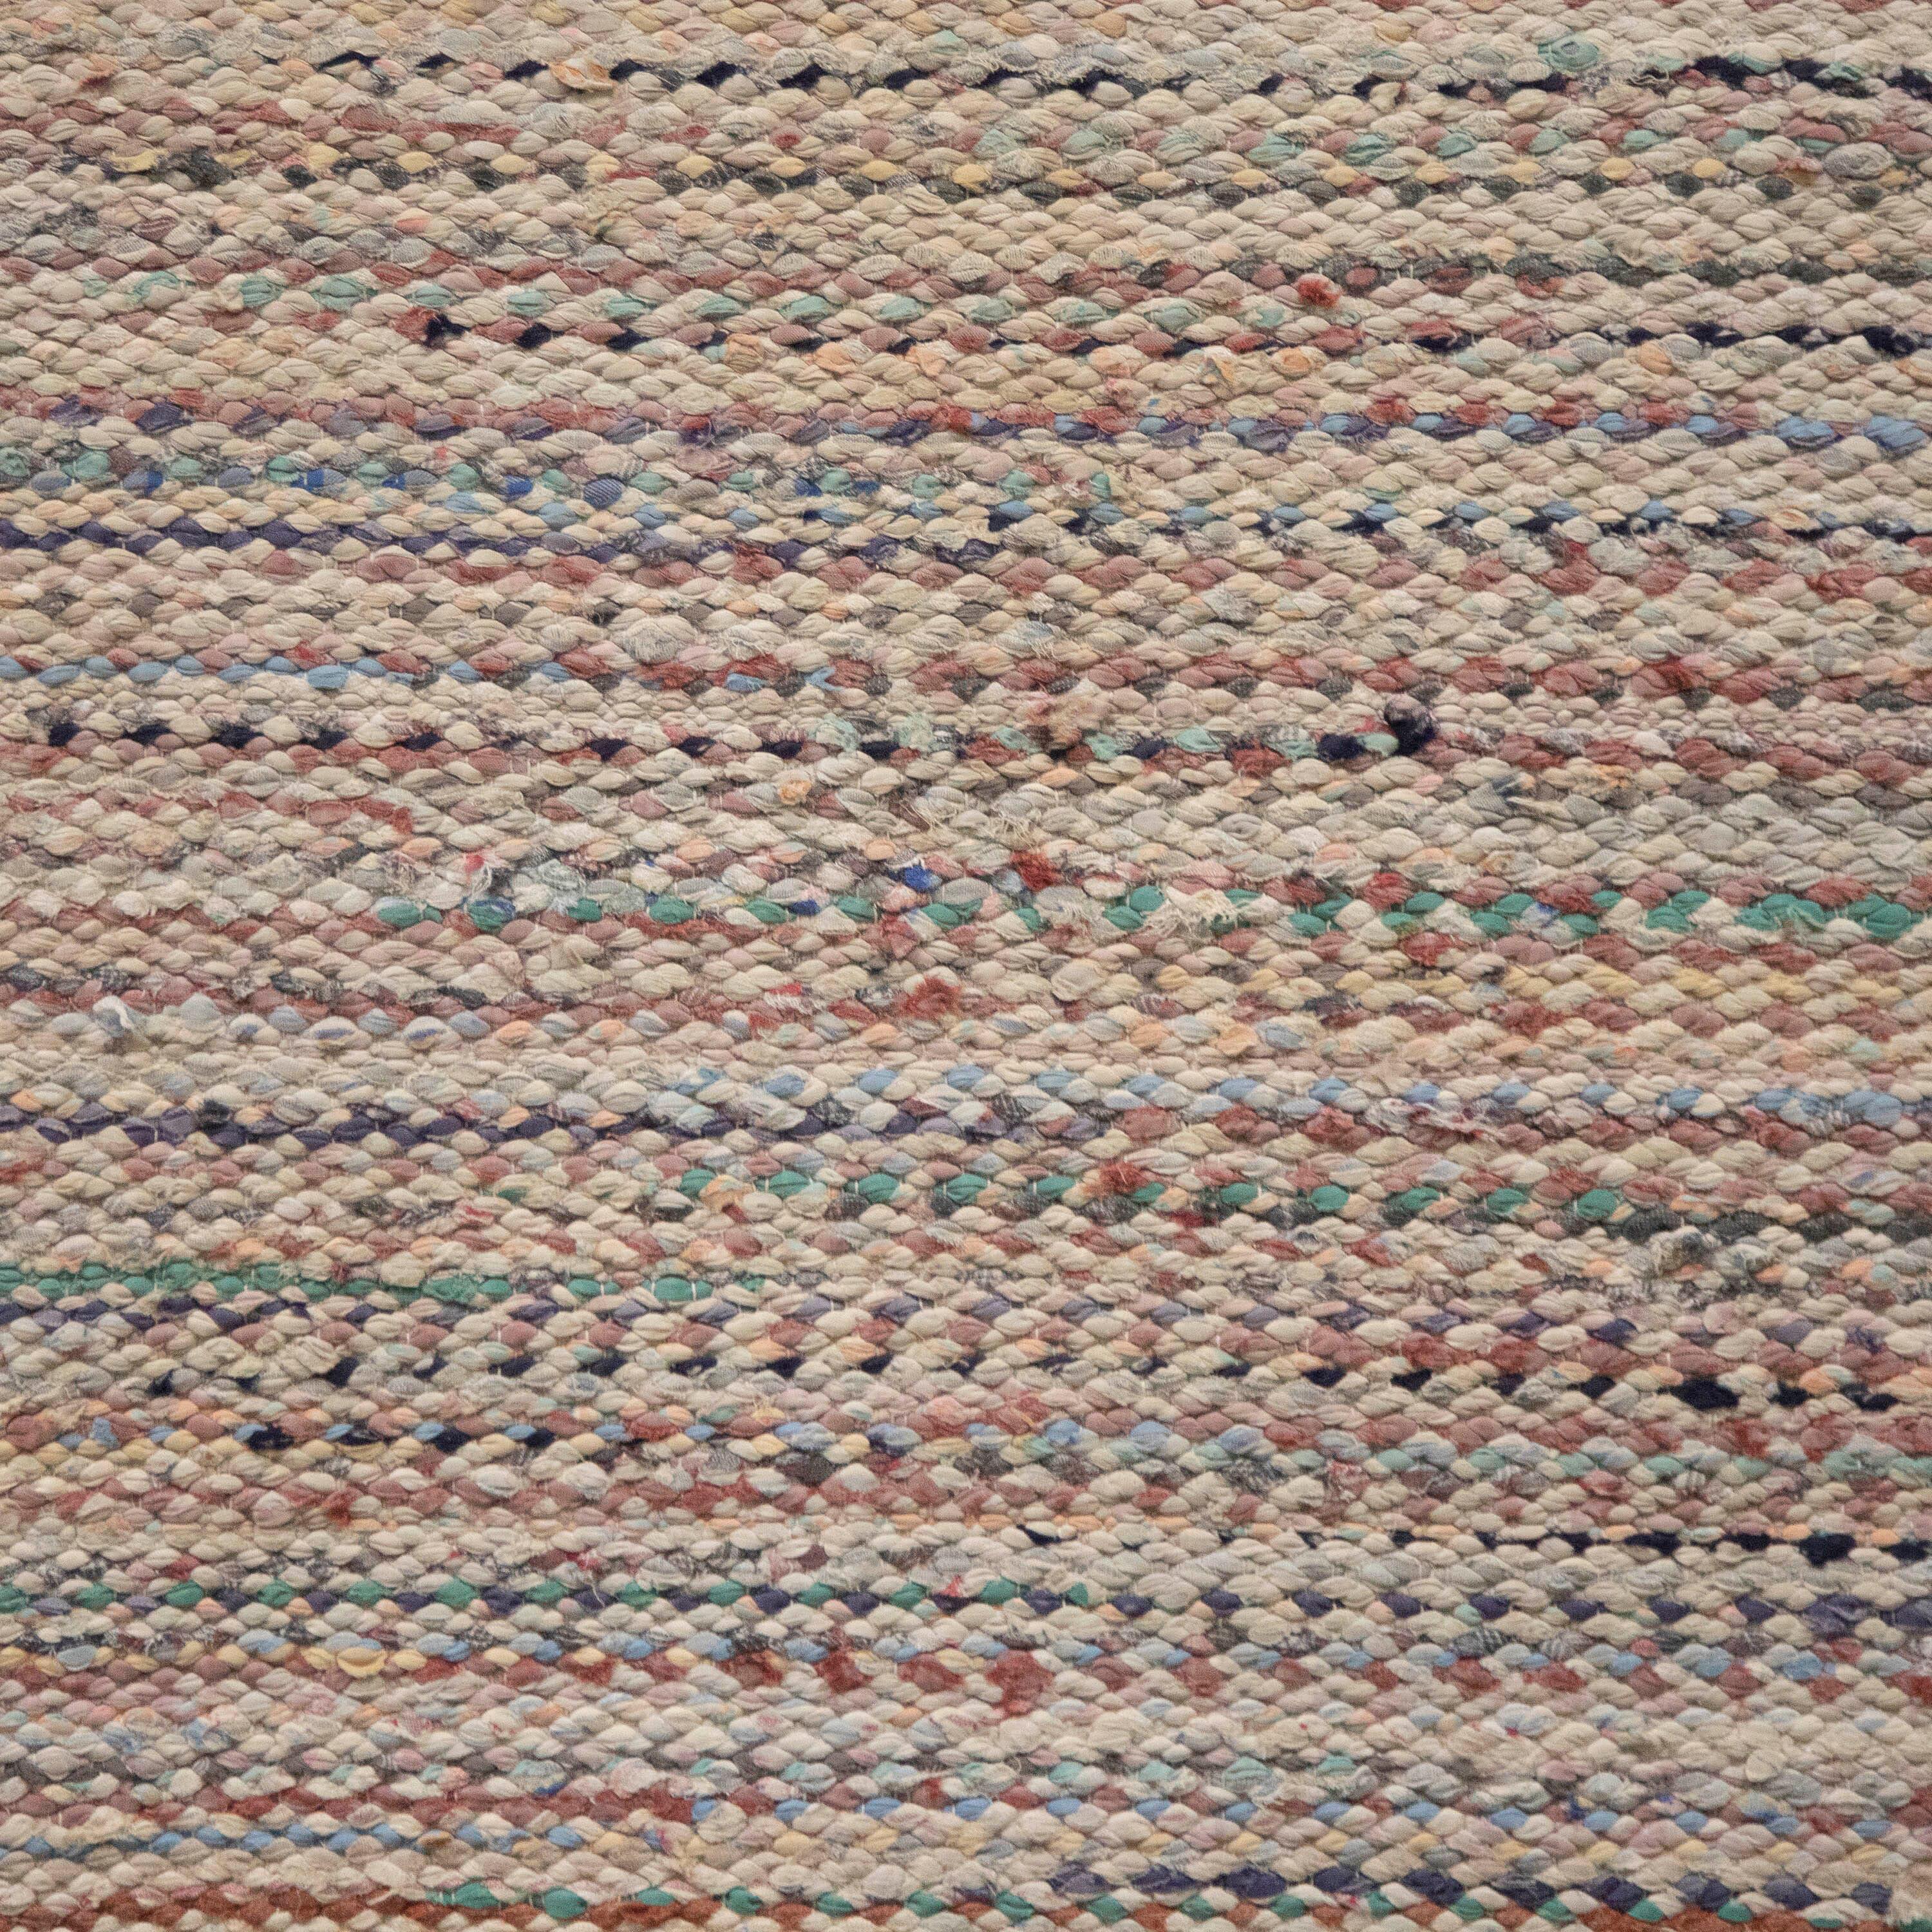 20th century Swedish rag rug. Featuring a stripe design in muted tones of green, red, and ecru. This rug is machine washable at 30 degrees.
RT6024603